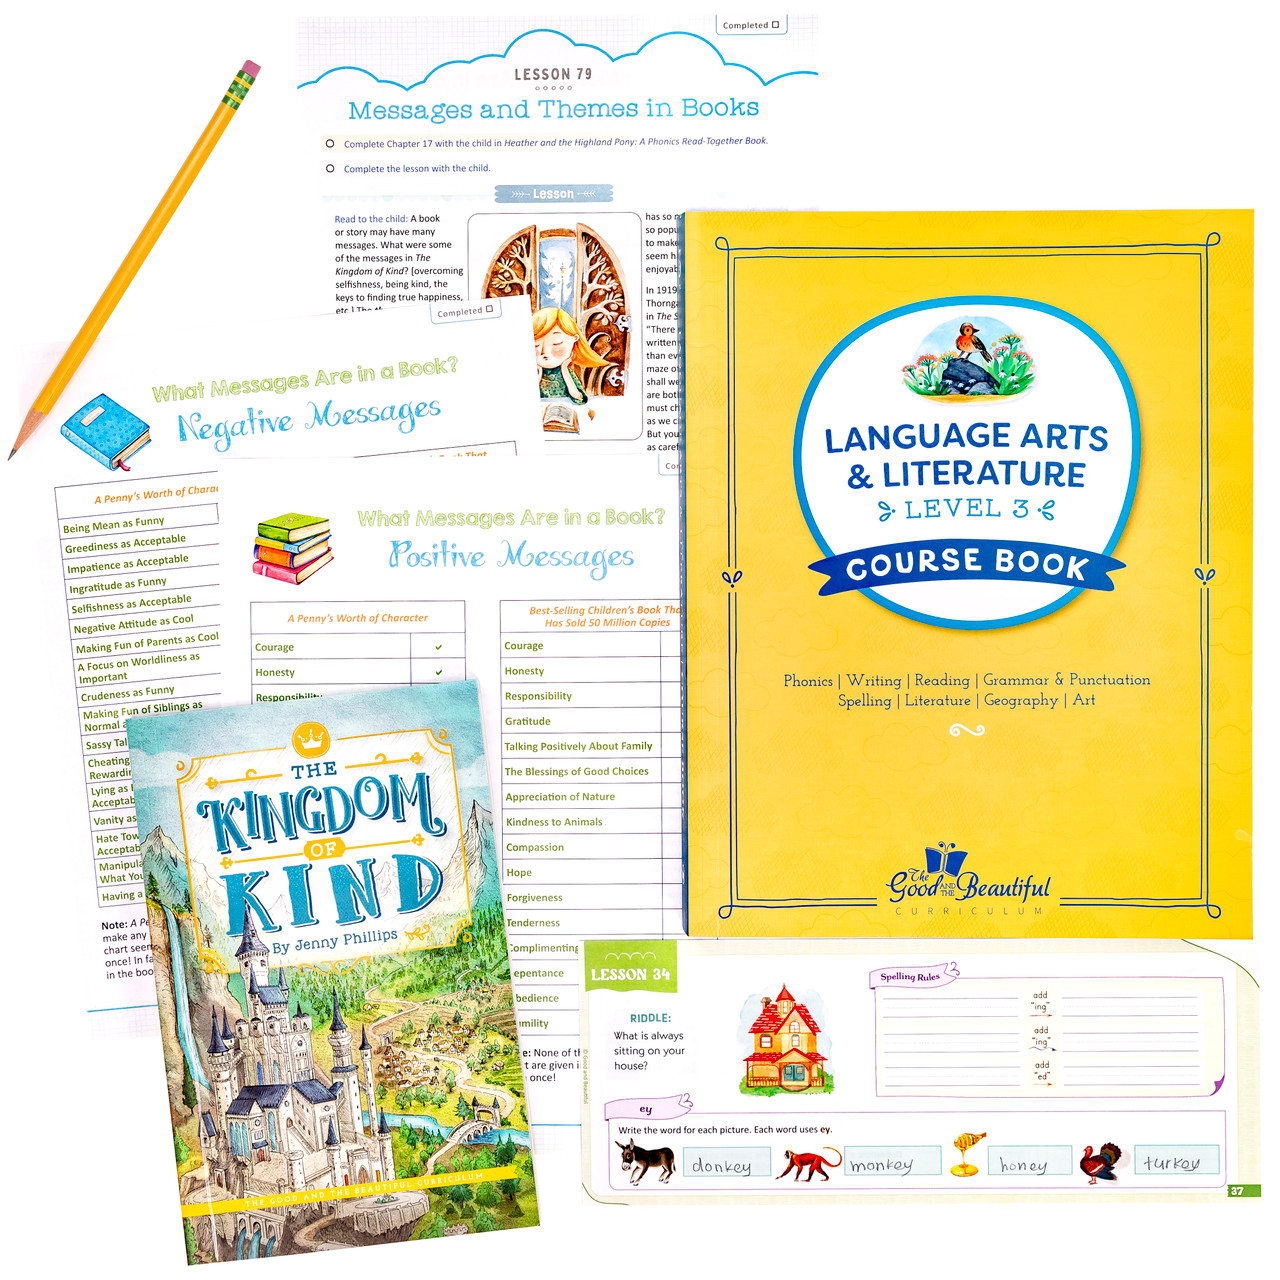 Language Arts Level 3 course book and pages spread